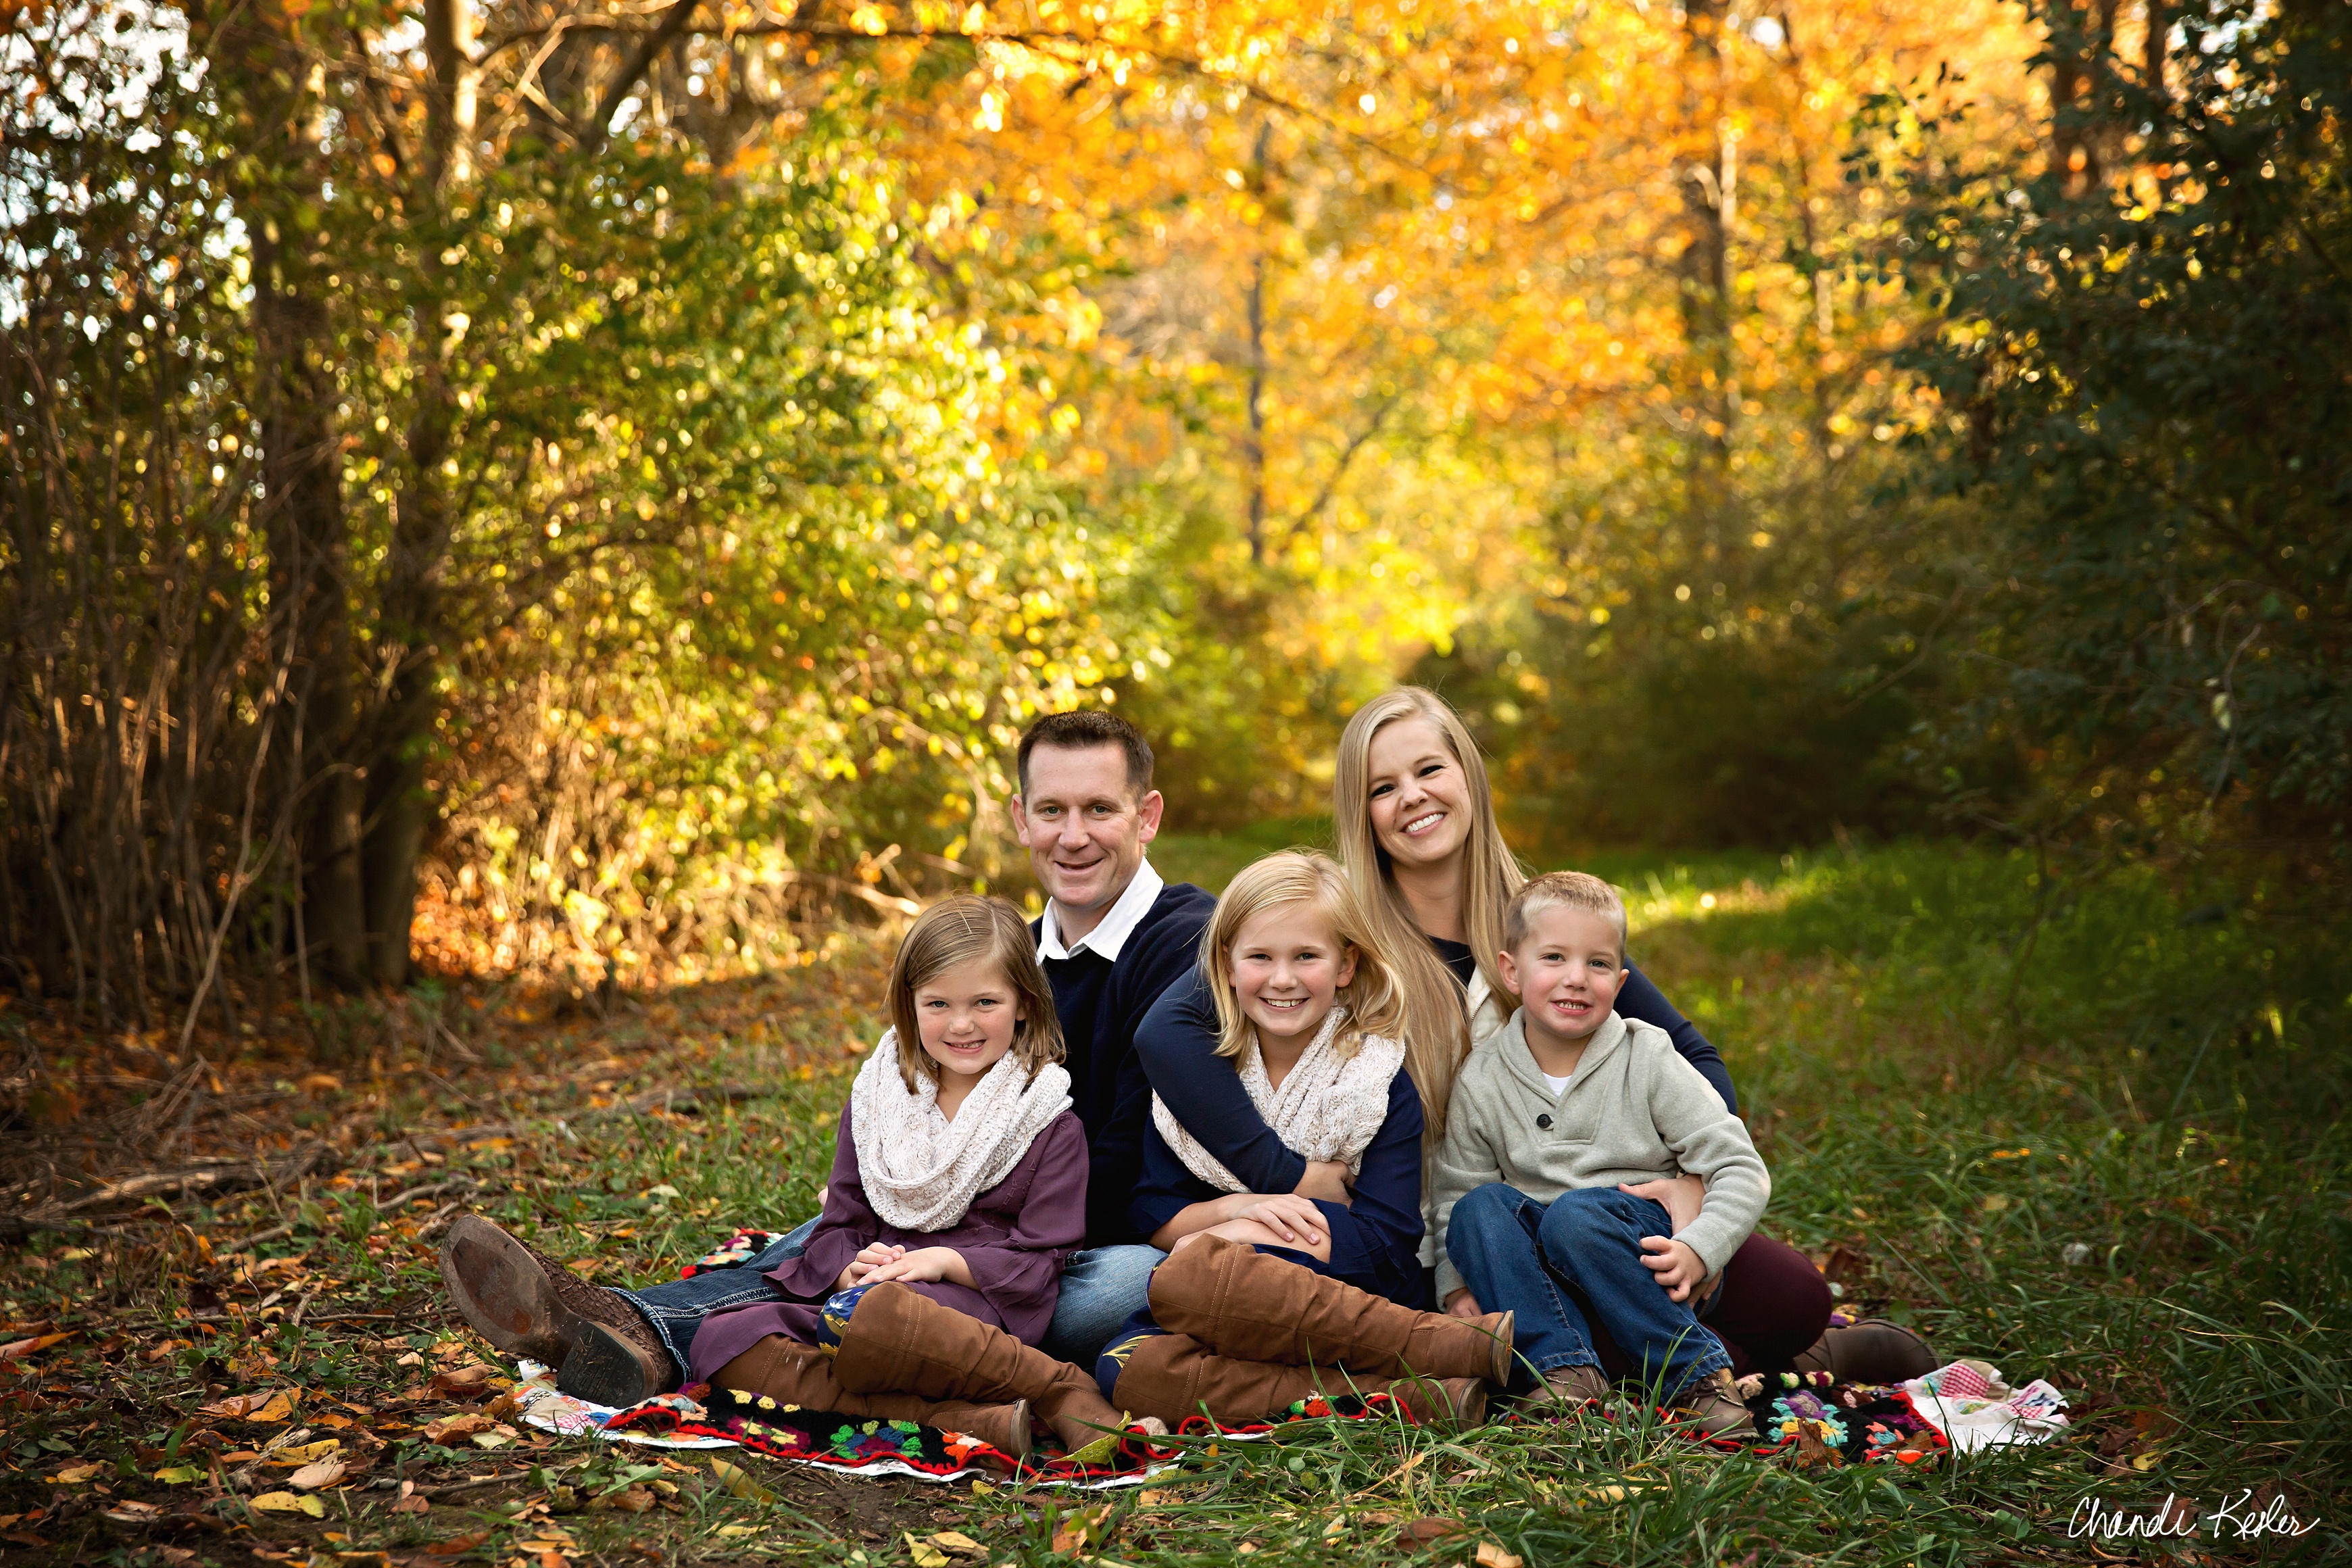 best Family photographer central il | chandi Kesler | Family of 5 picture ideas